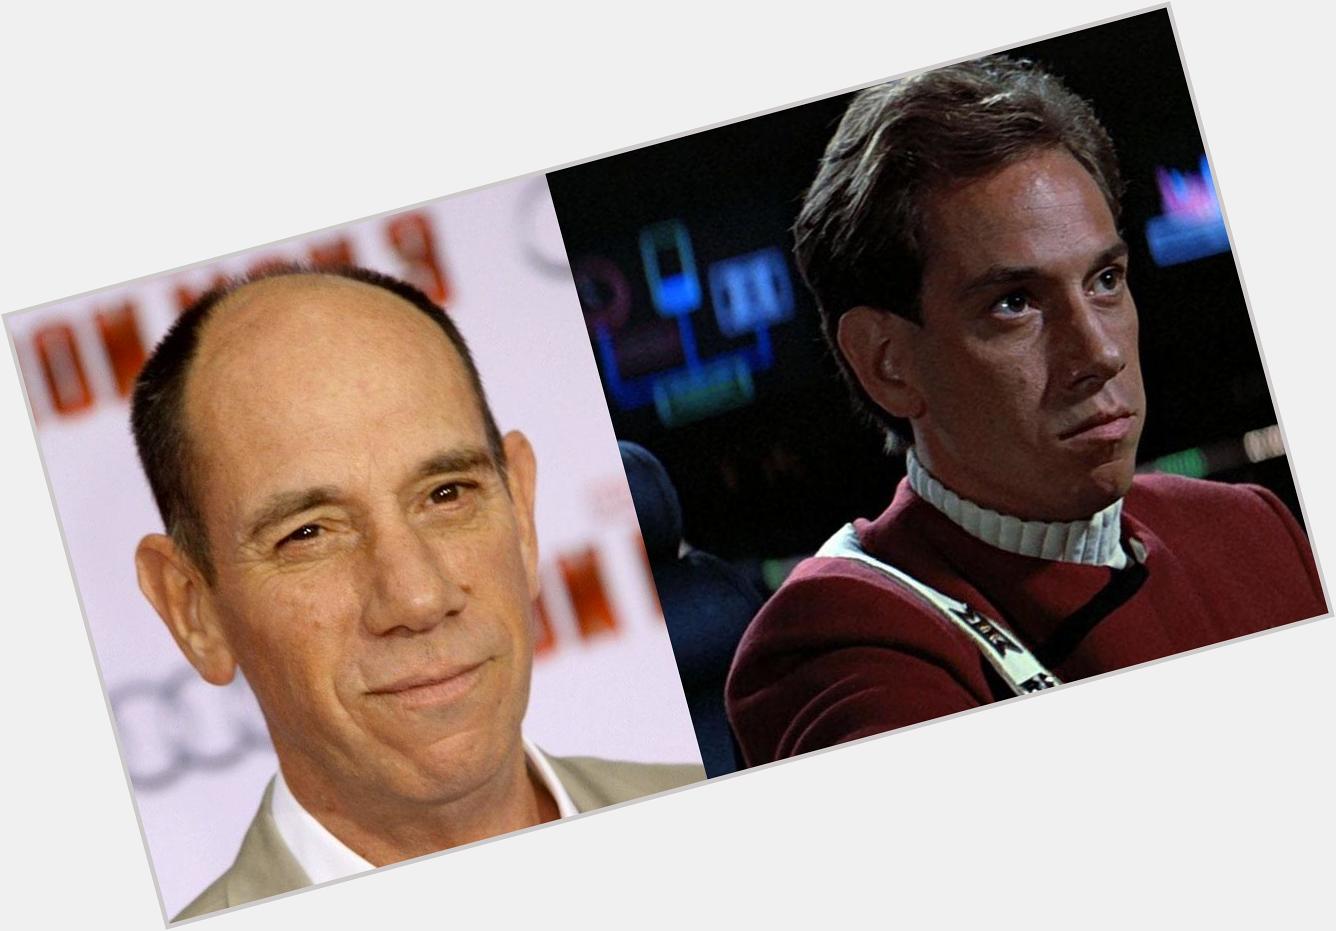 Join us in wishing a Happy Birthday to actor Miguel Ferrer! 